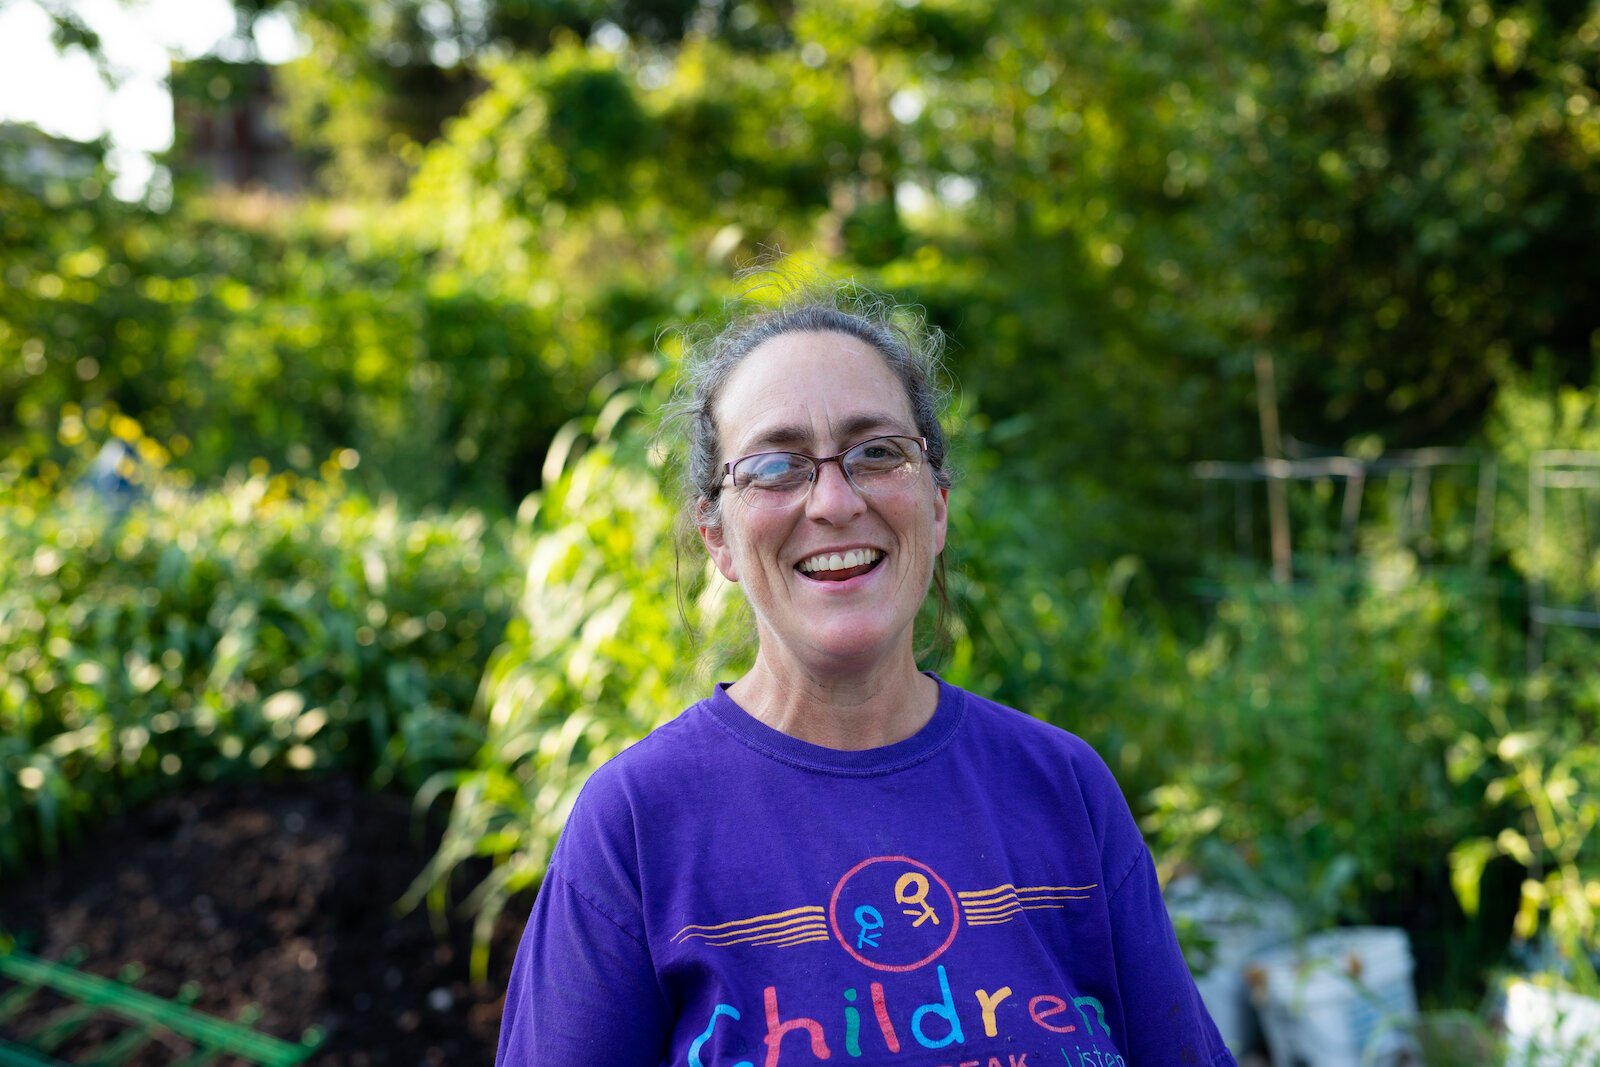 Diana Hart loves her community in South Central Fort Wayne, and she serves it by growing food at her home, known as Poplar Village Gardens.